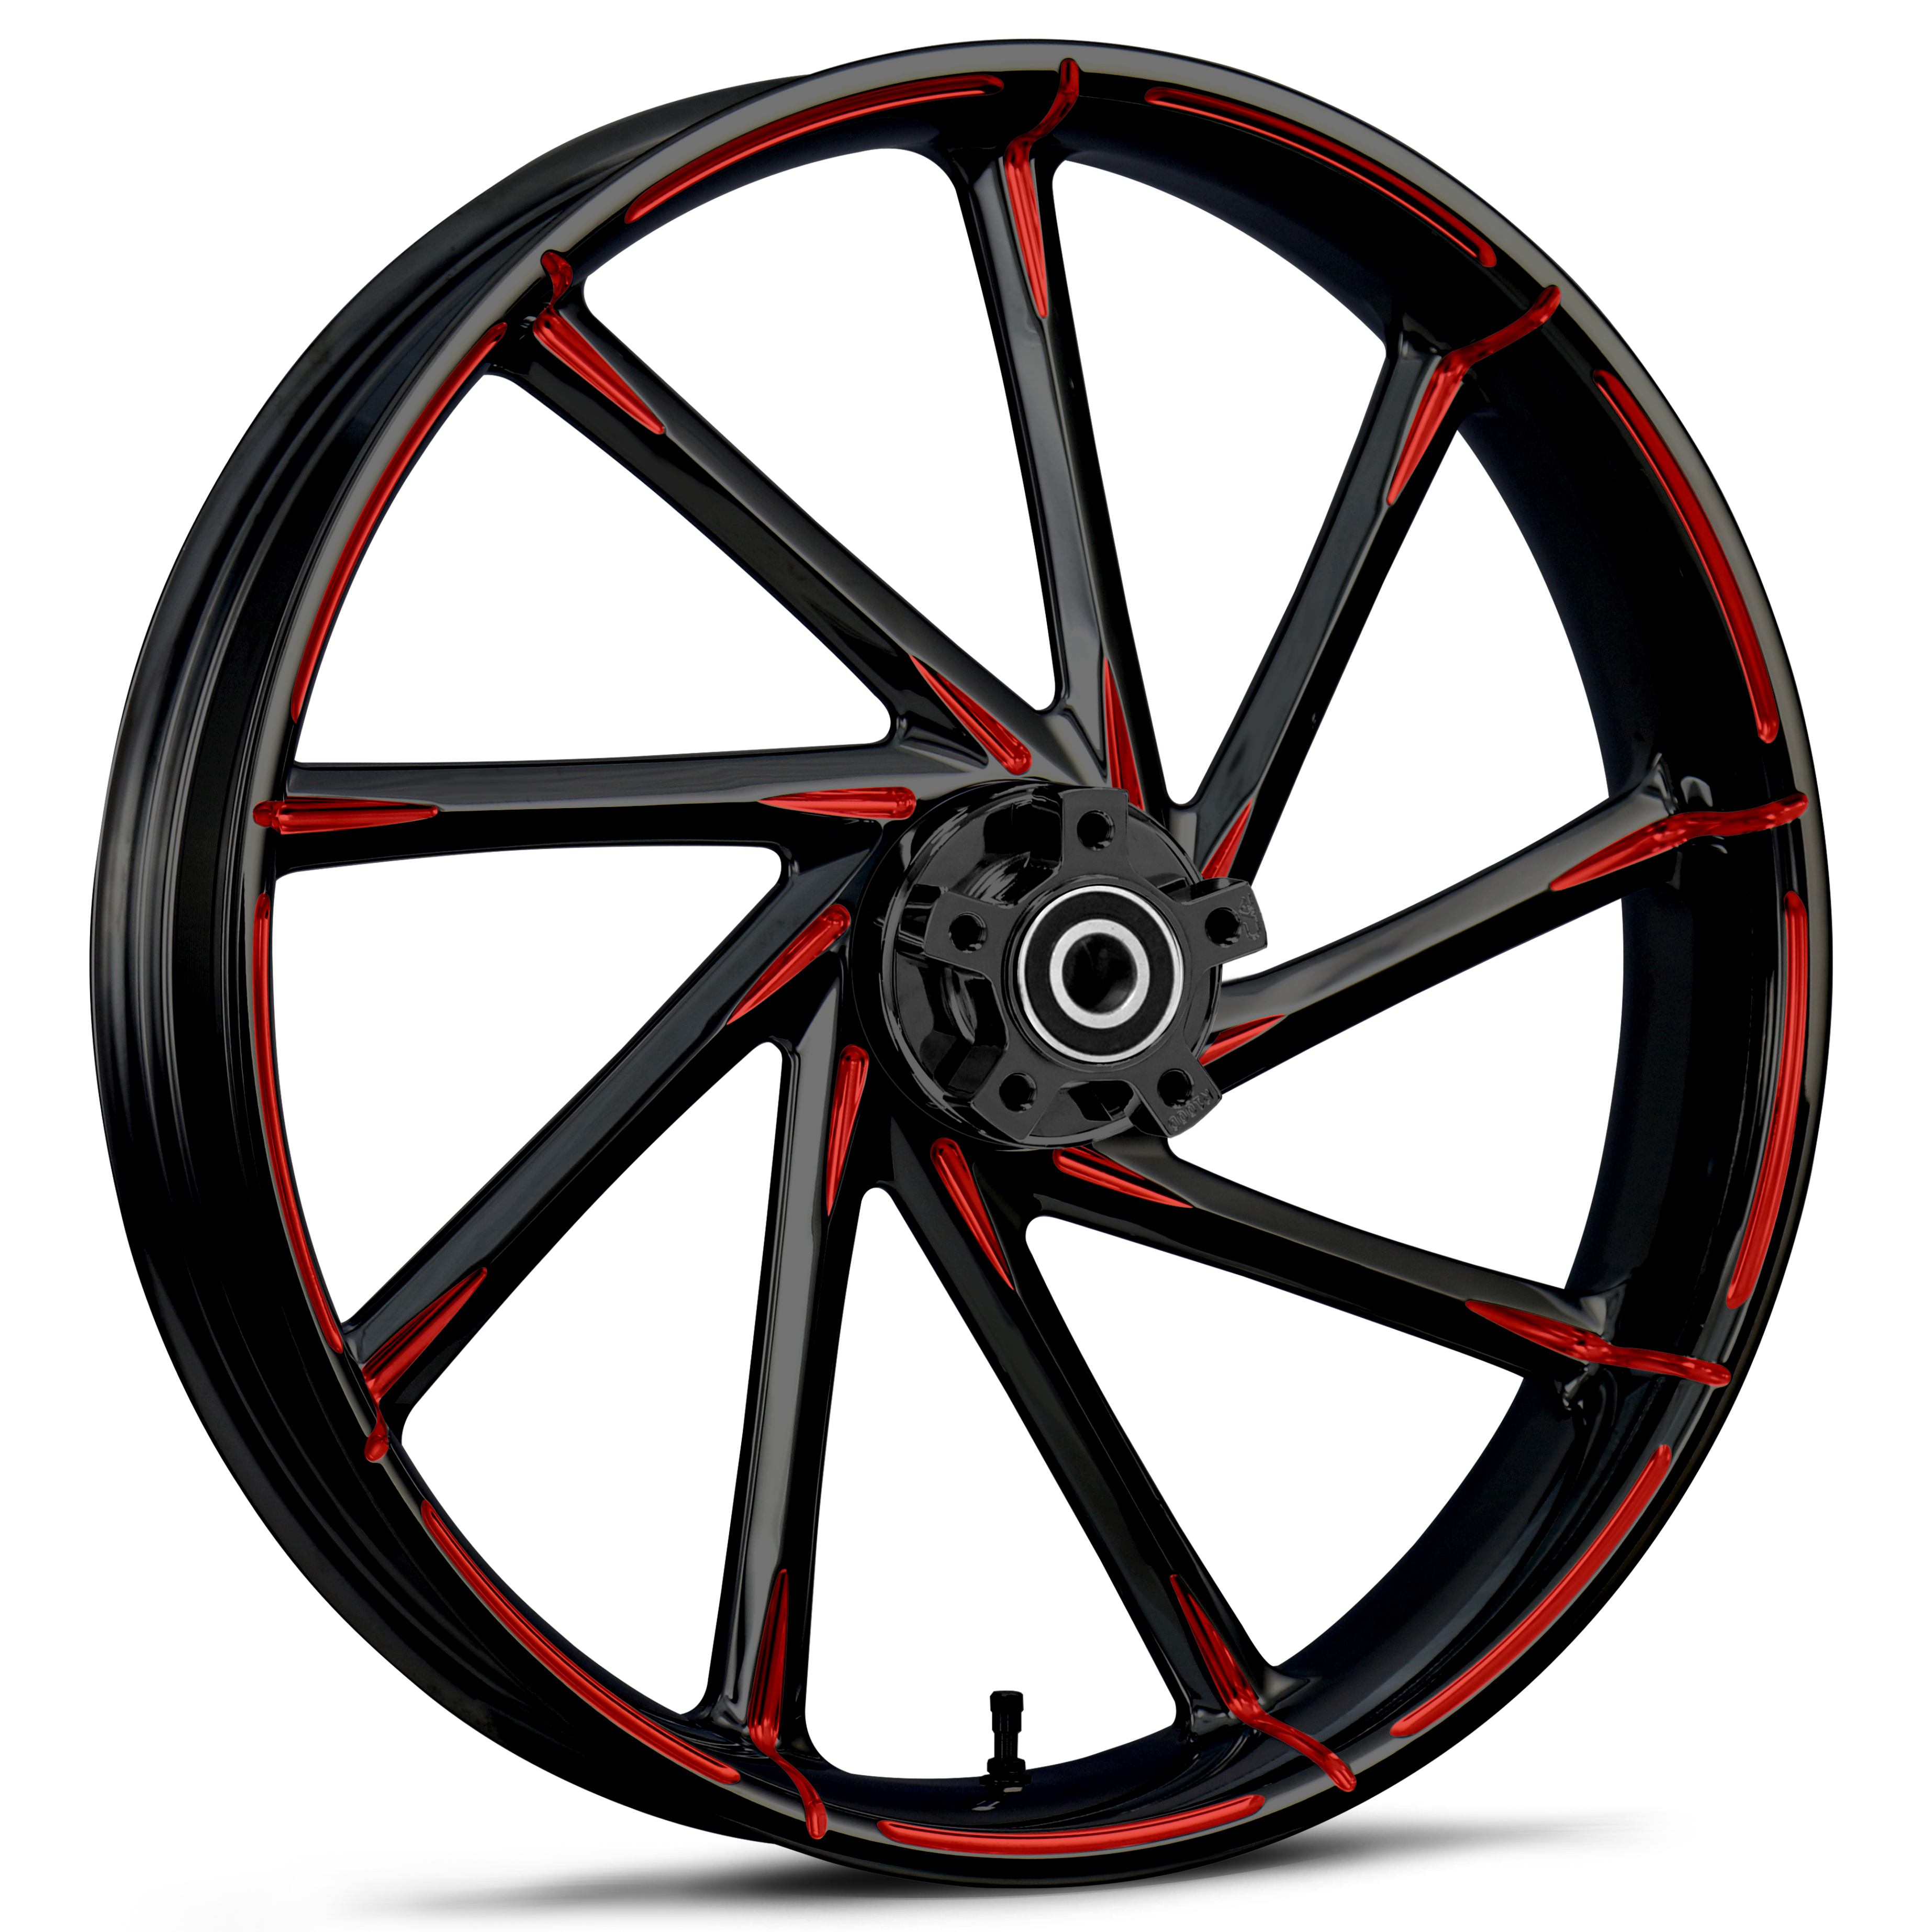 Kinetic TOC Red